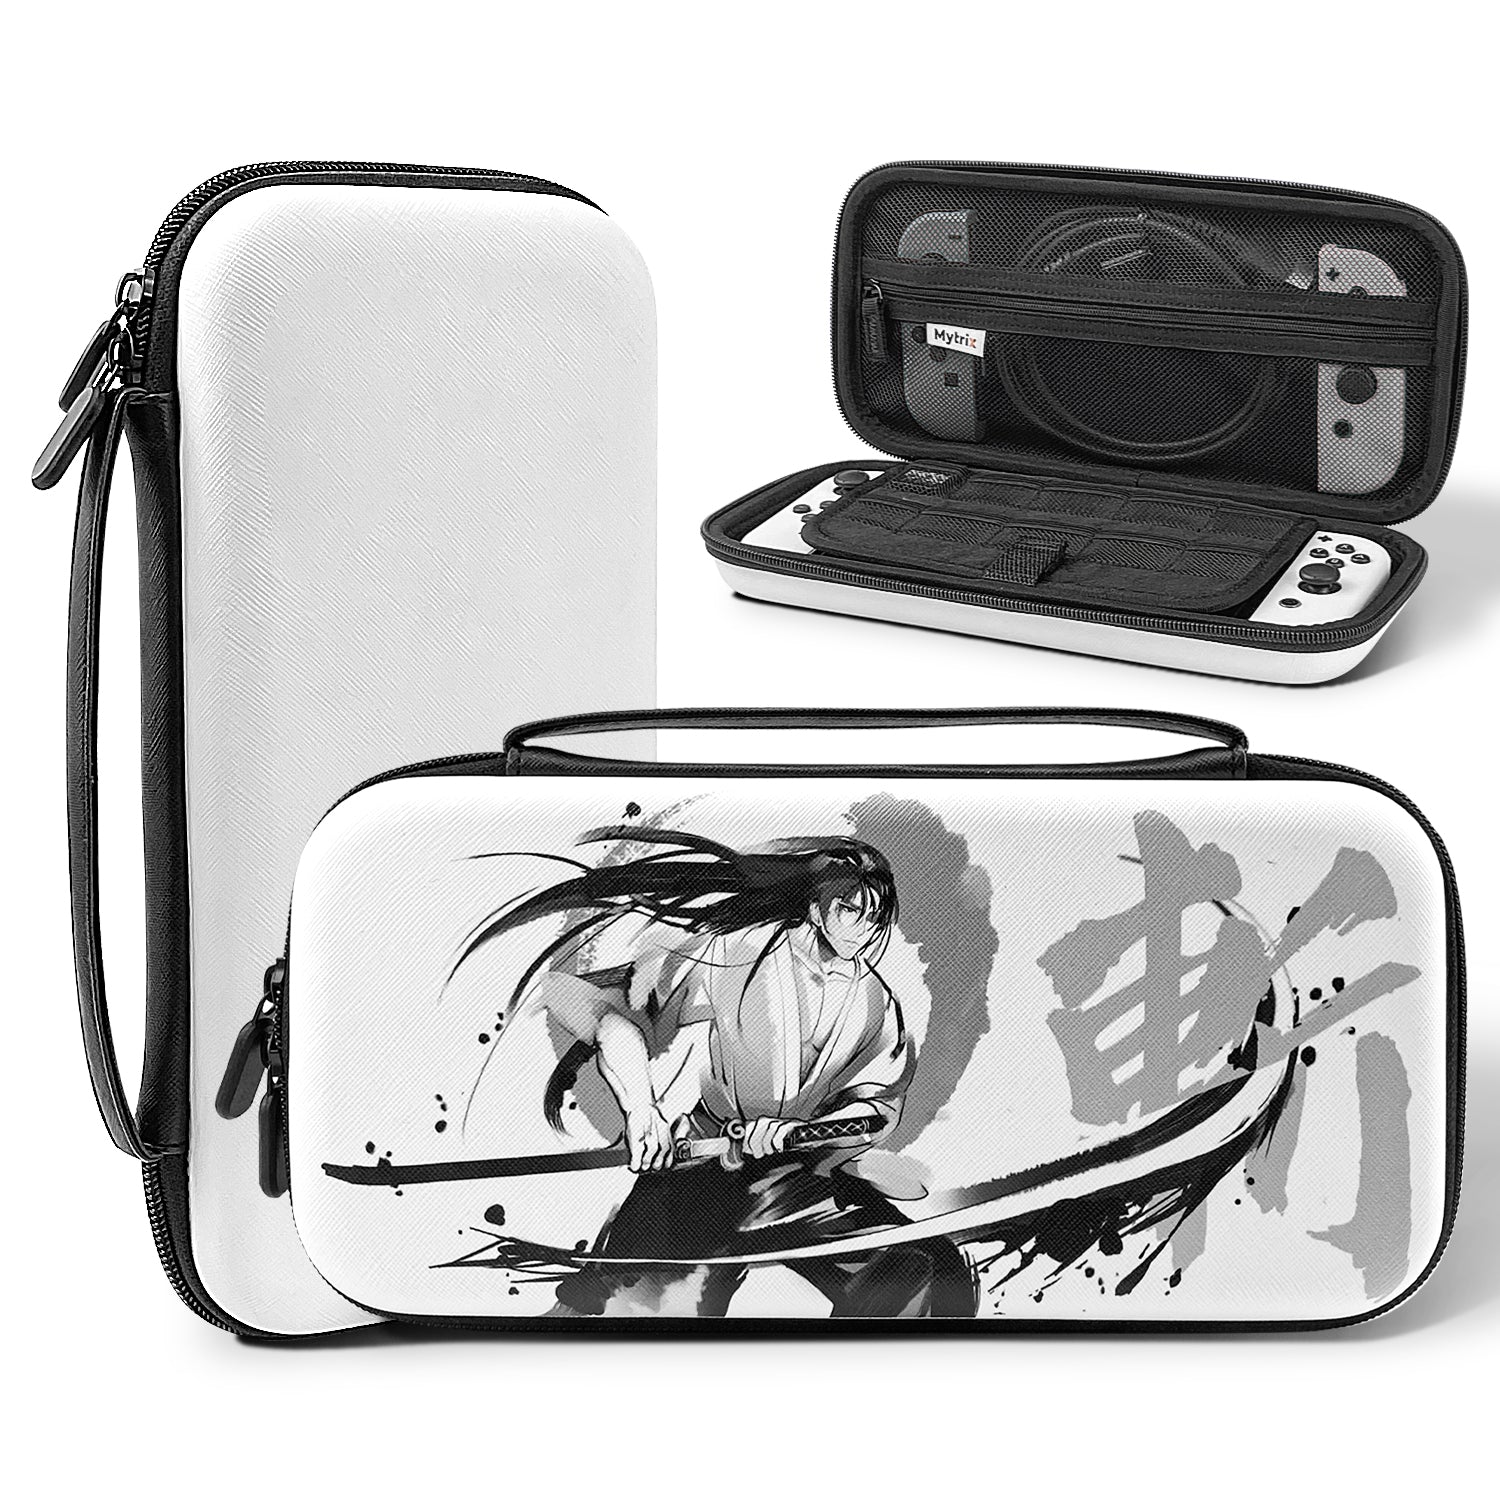 Amazon.com: GilGames Skin Decal for Nintendo Switch, Anime Protector Wrap  Protective Faceplate Full Set Stickers Console Dock : Video Games